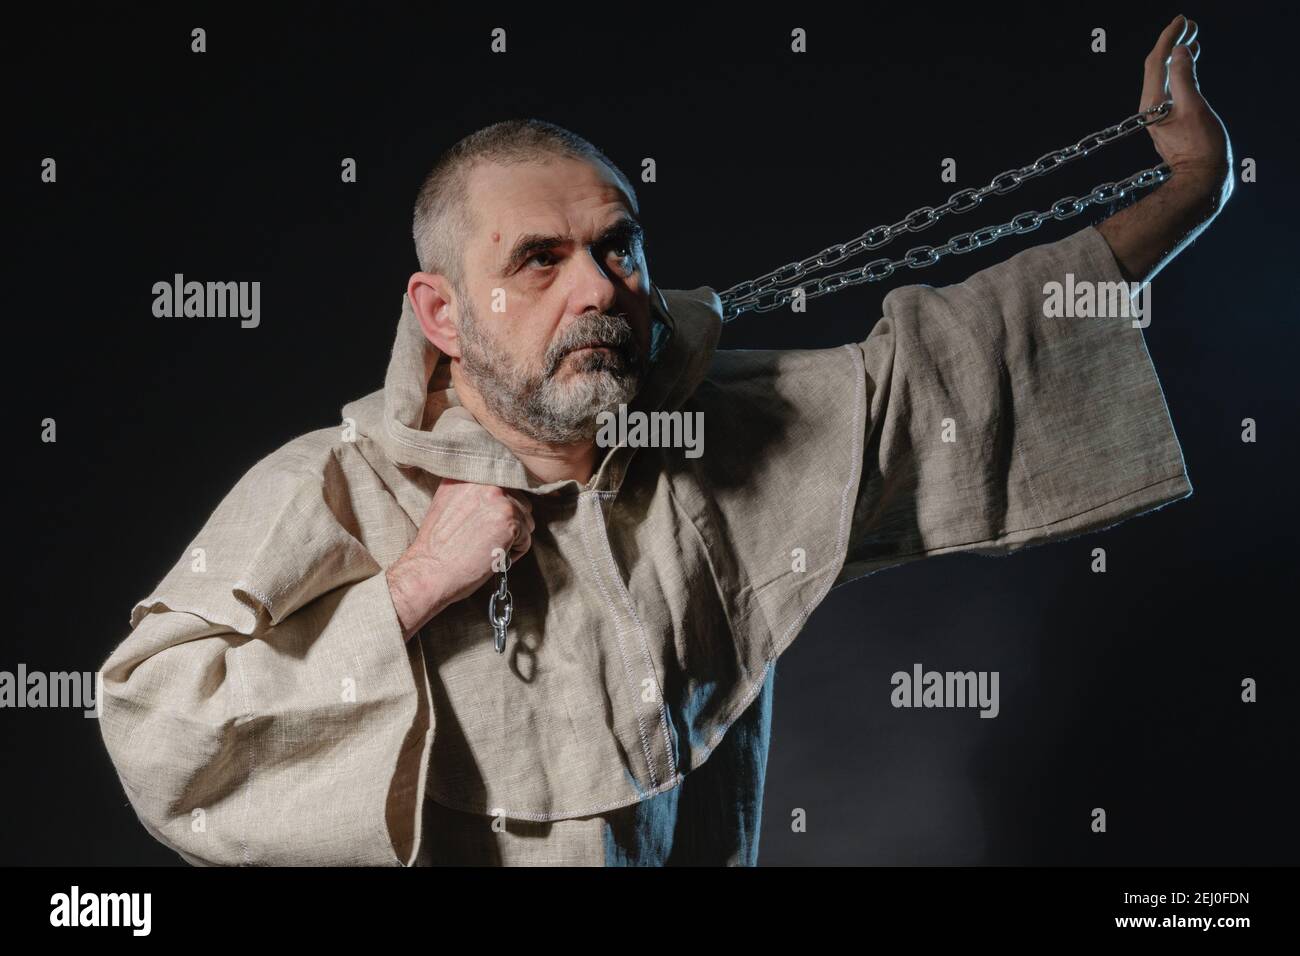 A wandering militant monk practicing a martial art with a chain in his hands Stock Photo